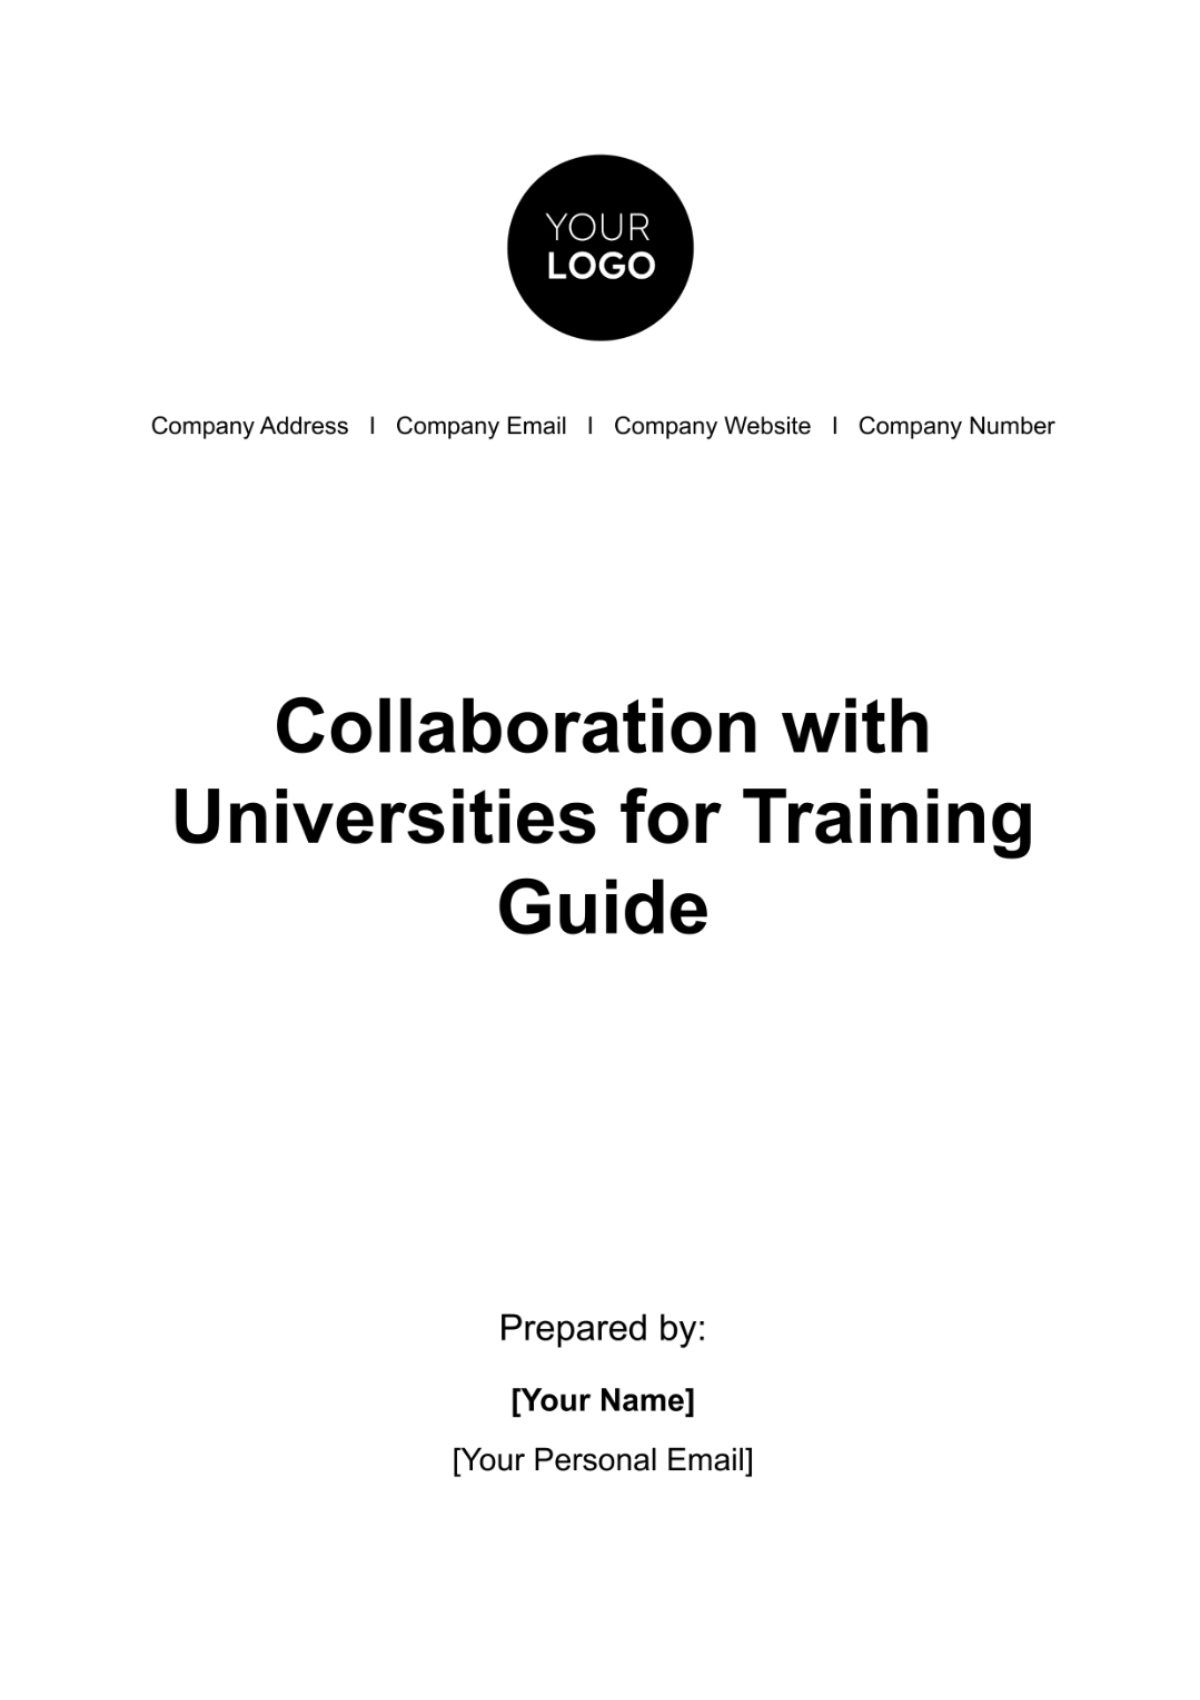 Collaboration with Universities for Training Guide HR Template